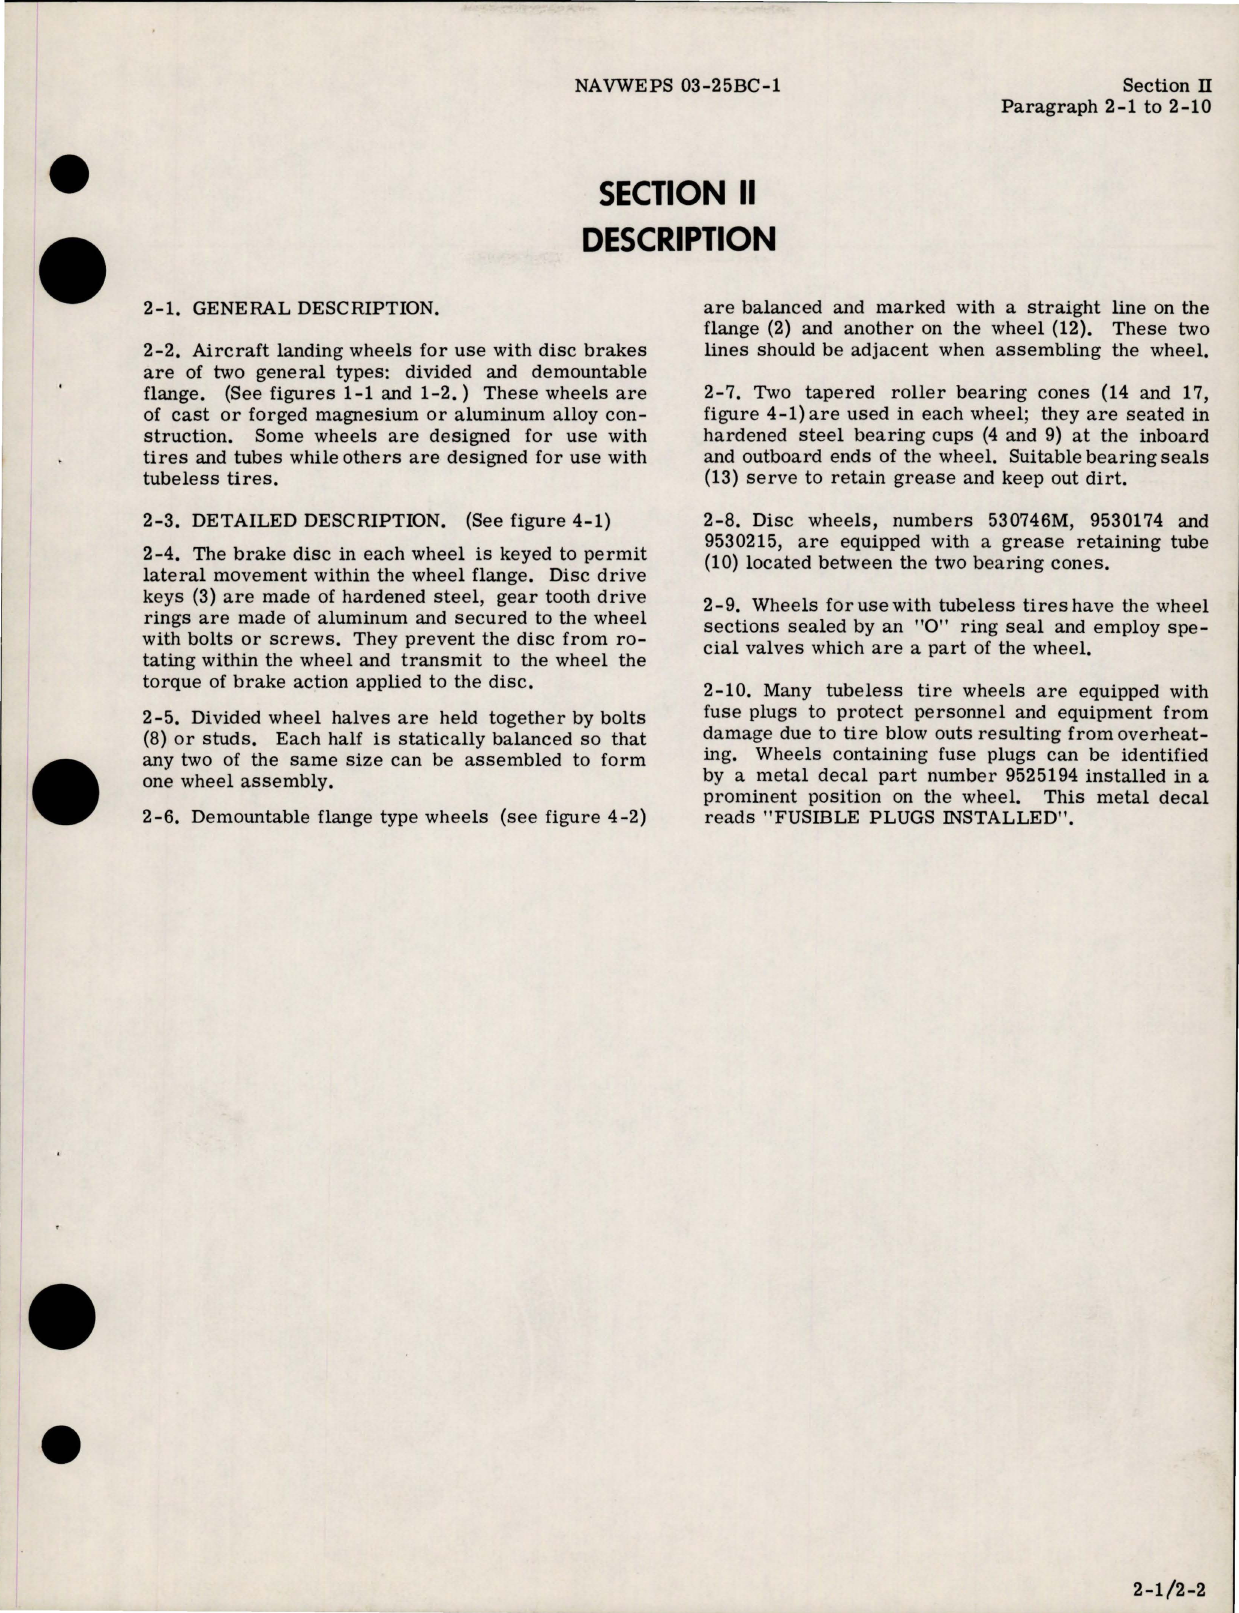 Sample page 7 from AirCorps Library document: Overhaul Instructions for Landing Wheels for use with Disc Brakes